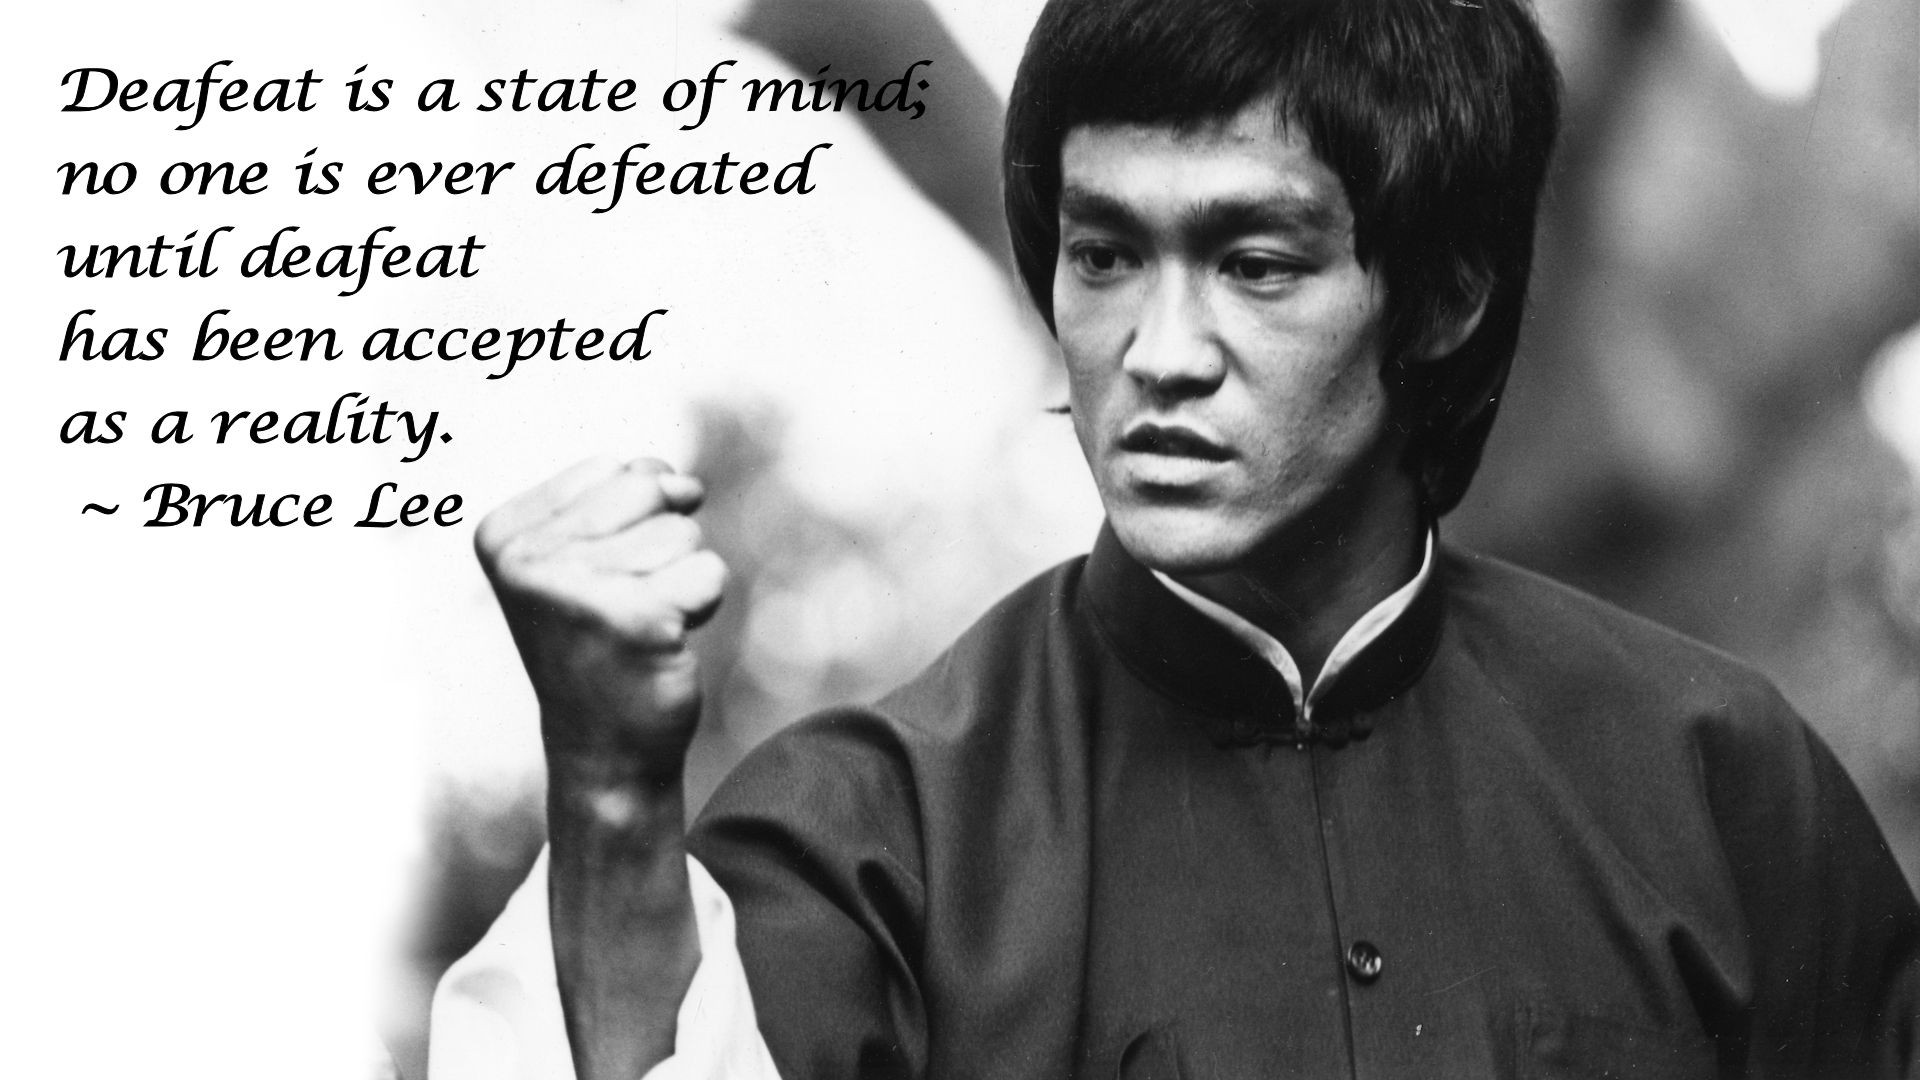 Lee Bw Defeat Martial Art Text Quotes Black White Wallpaper Background